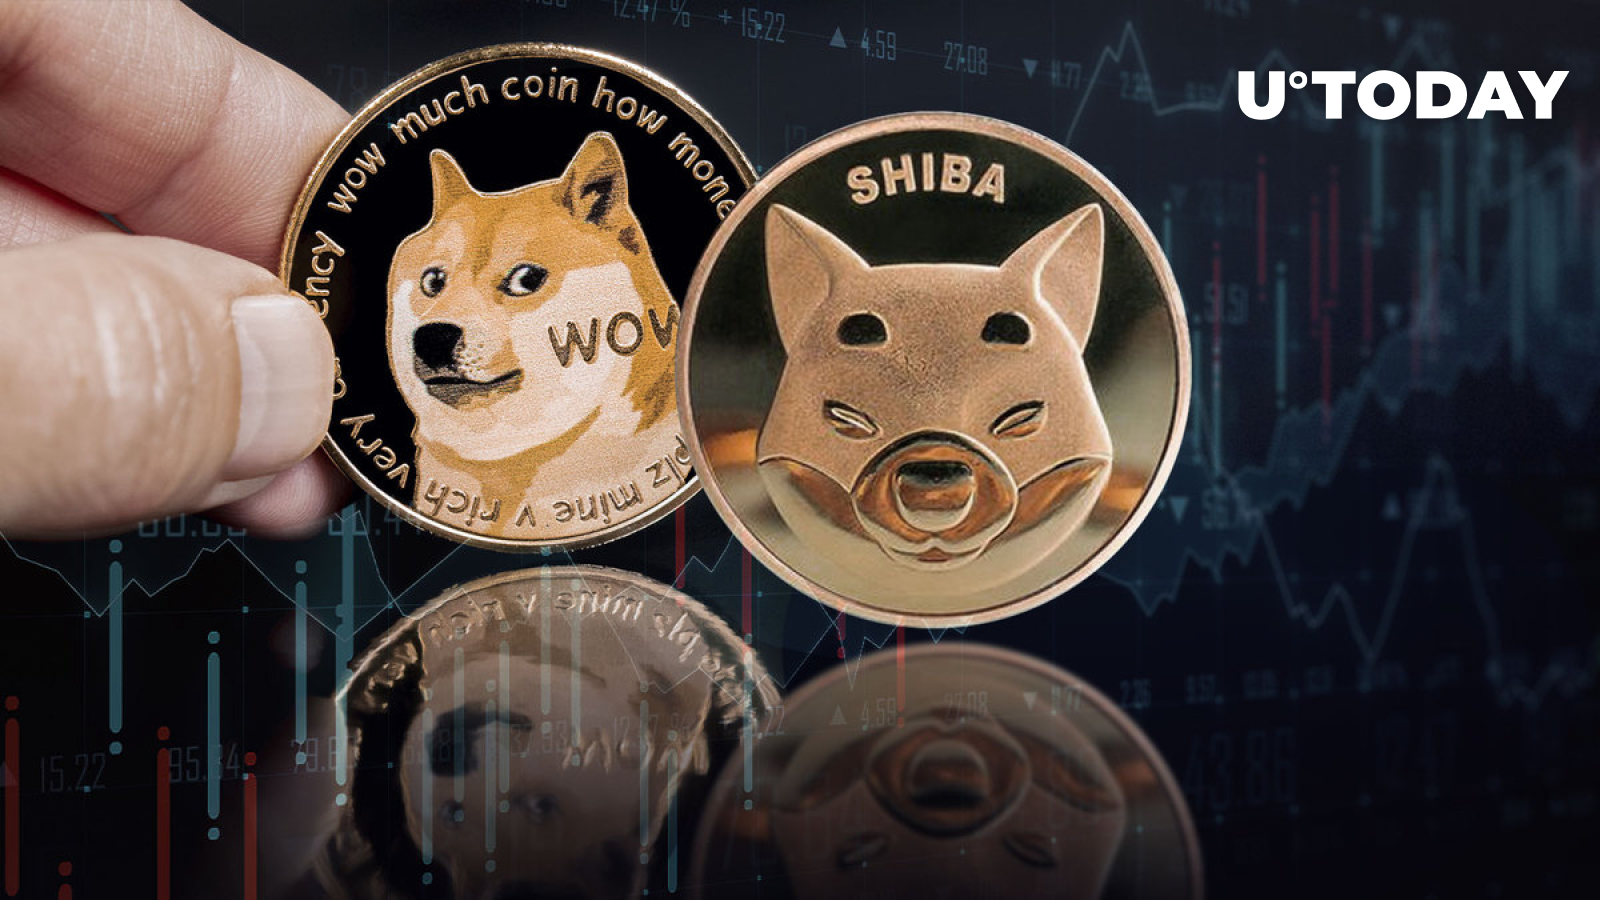 Shiba Inu-Dogecoin-Led Meme Economy Sees 16% Jump in Trading Volumes Amid Market Drop